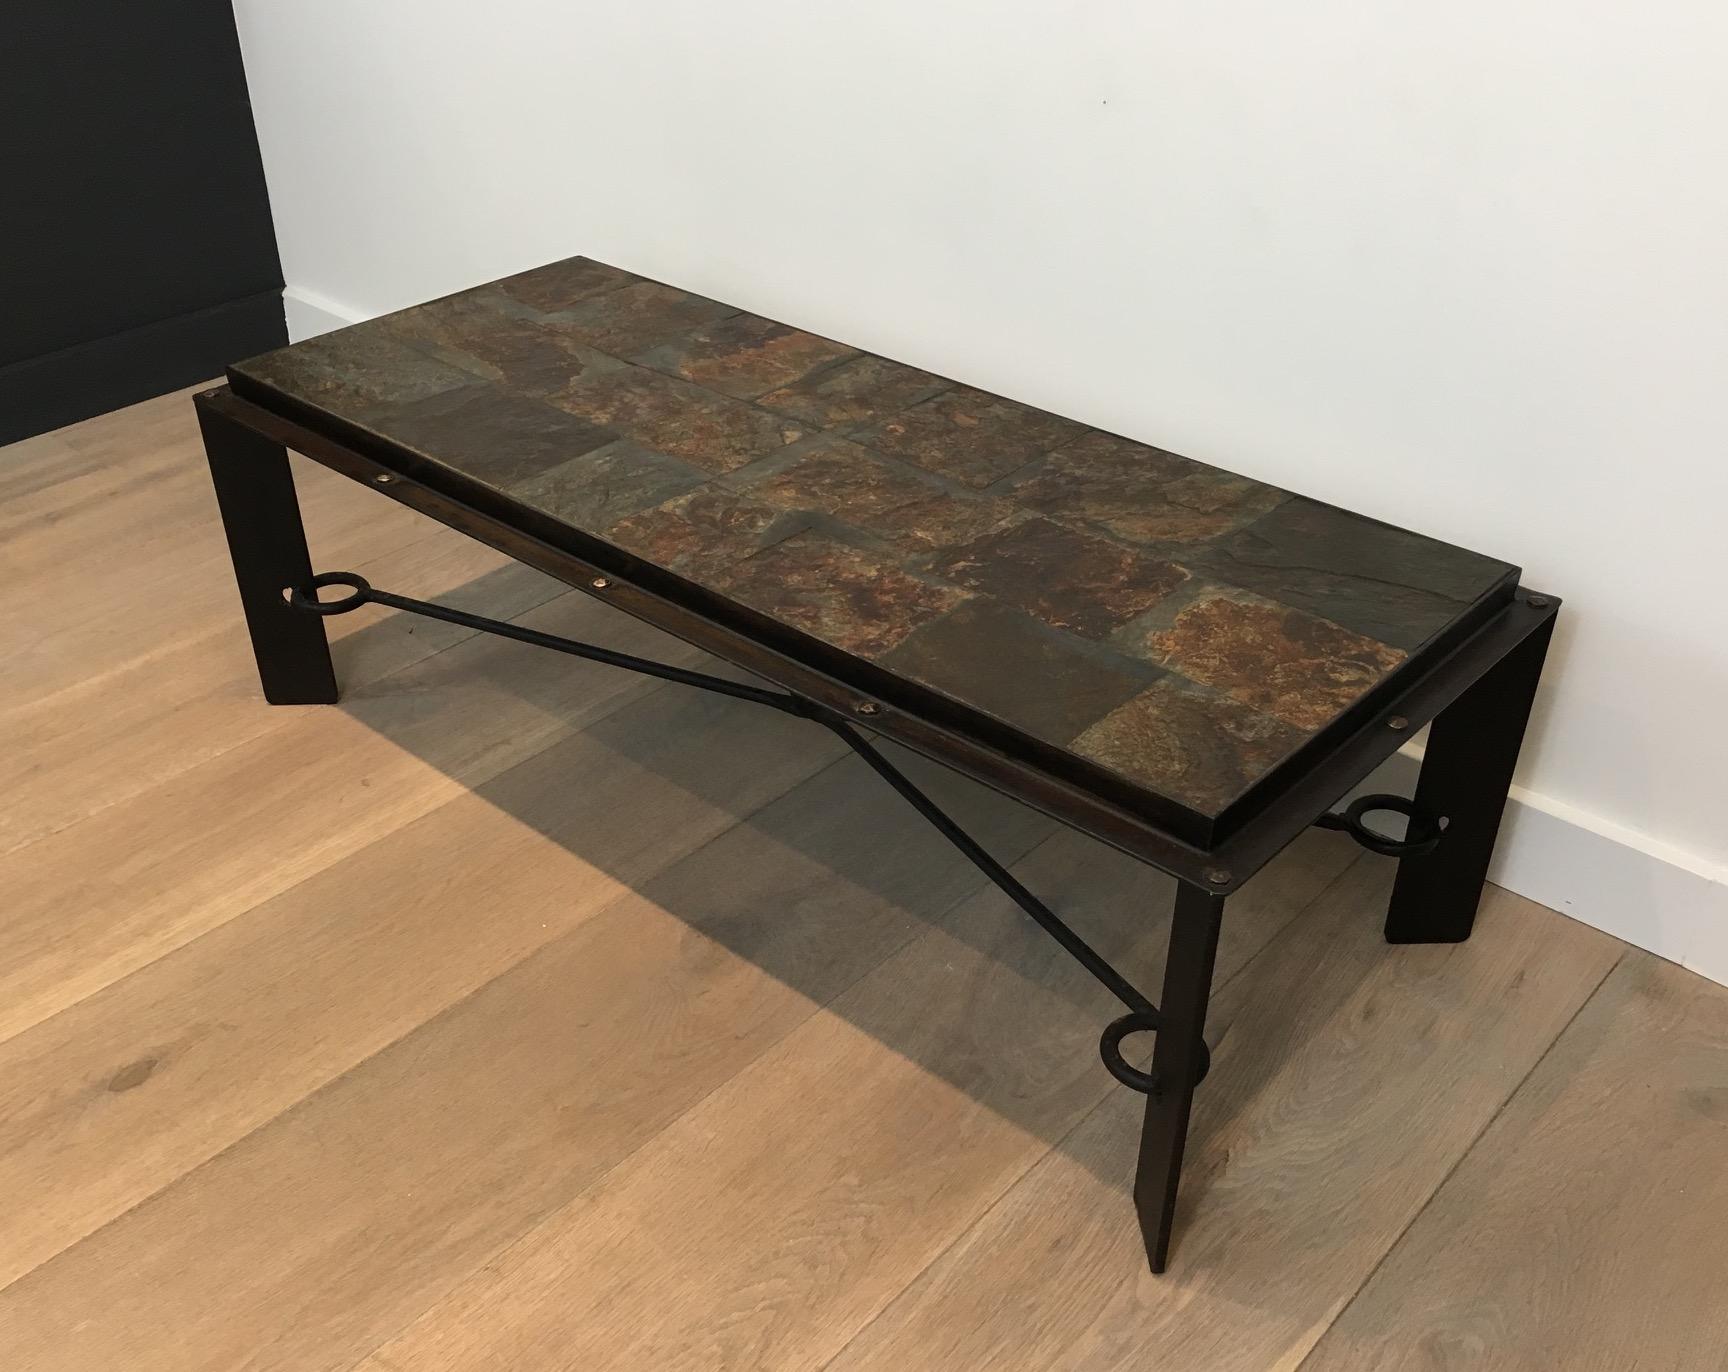 This unique and beautiful coffee table is made of steel and iron with a lava stone top. This is a very interesting design with forged iron and large rivets all around the top frame. The top is made of beautiful patchwork lava stone tiles. This is a